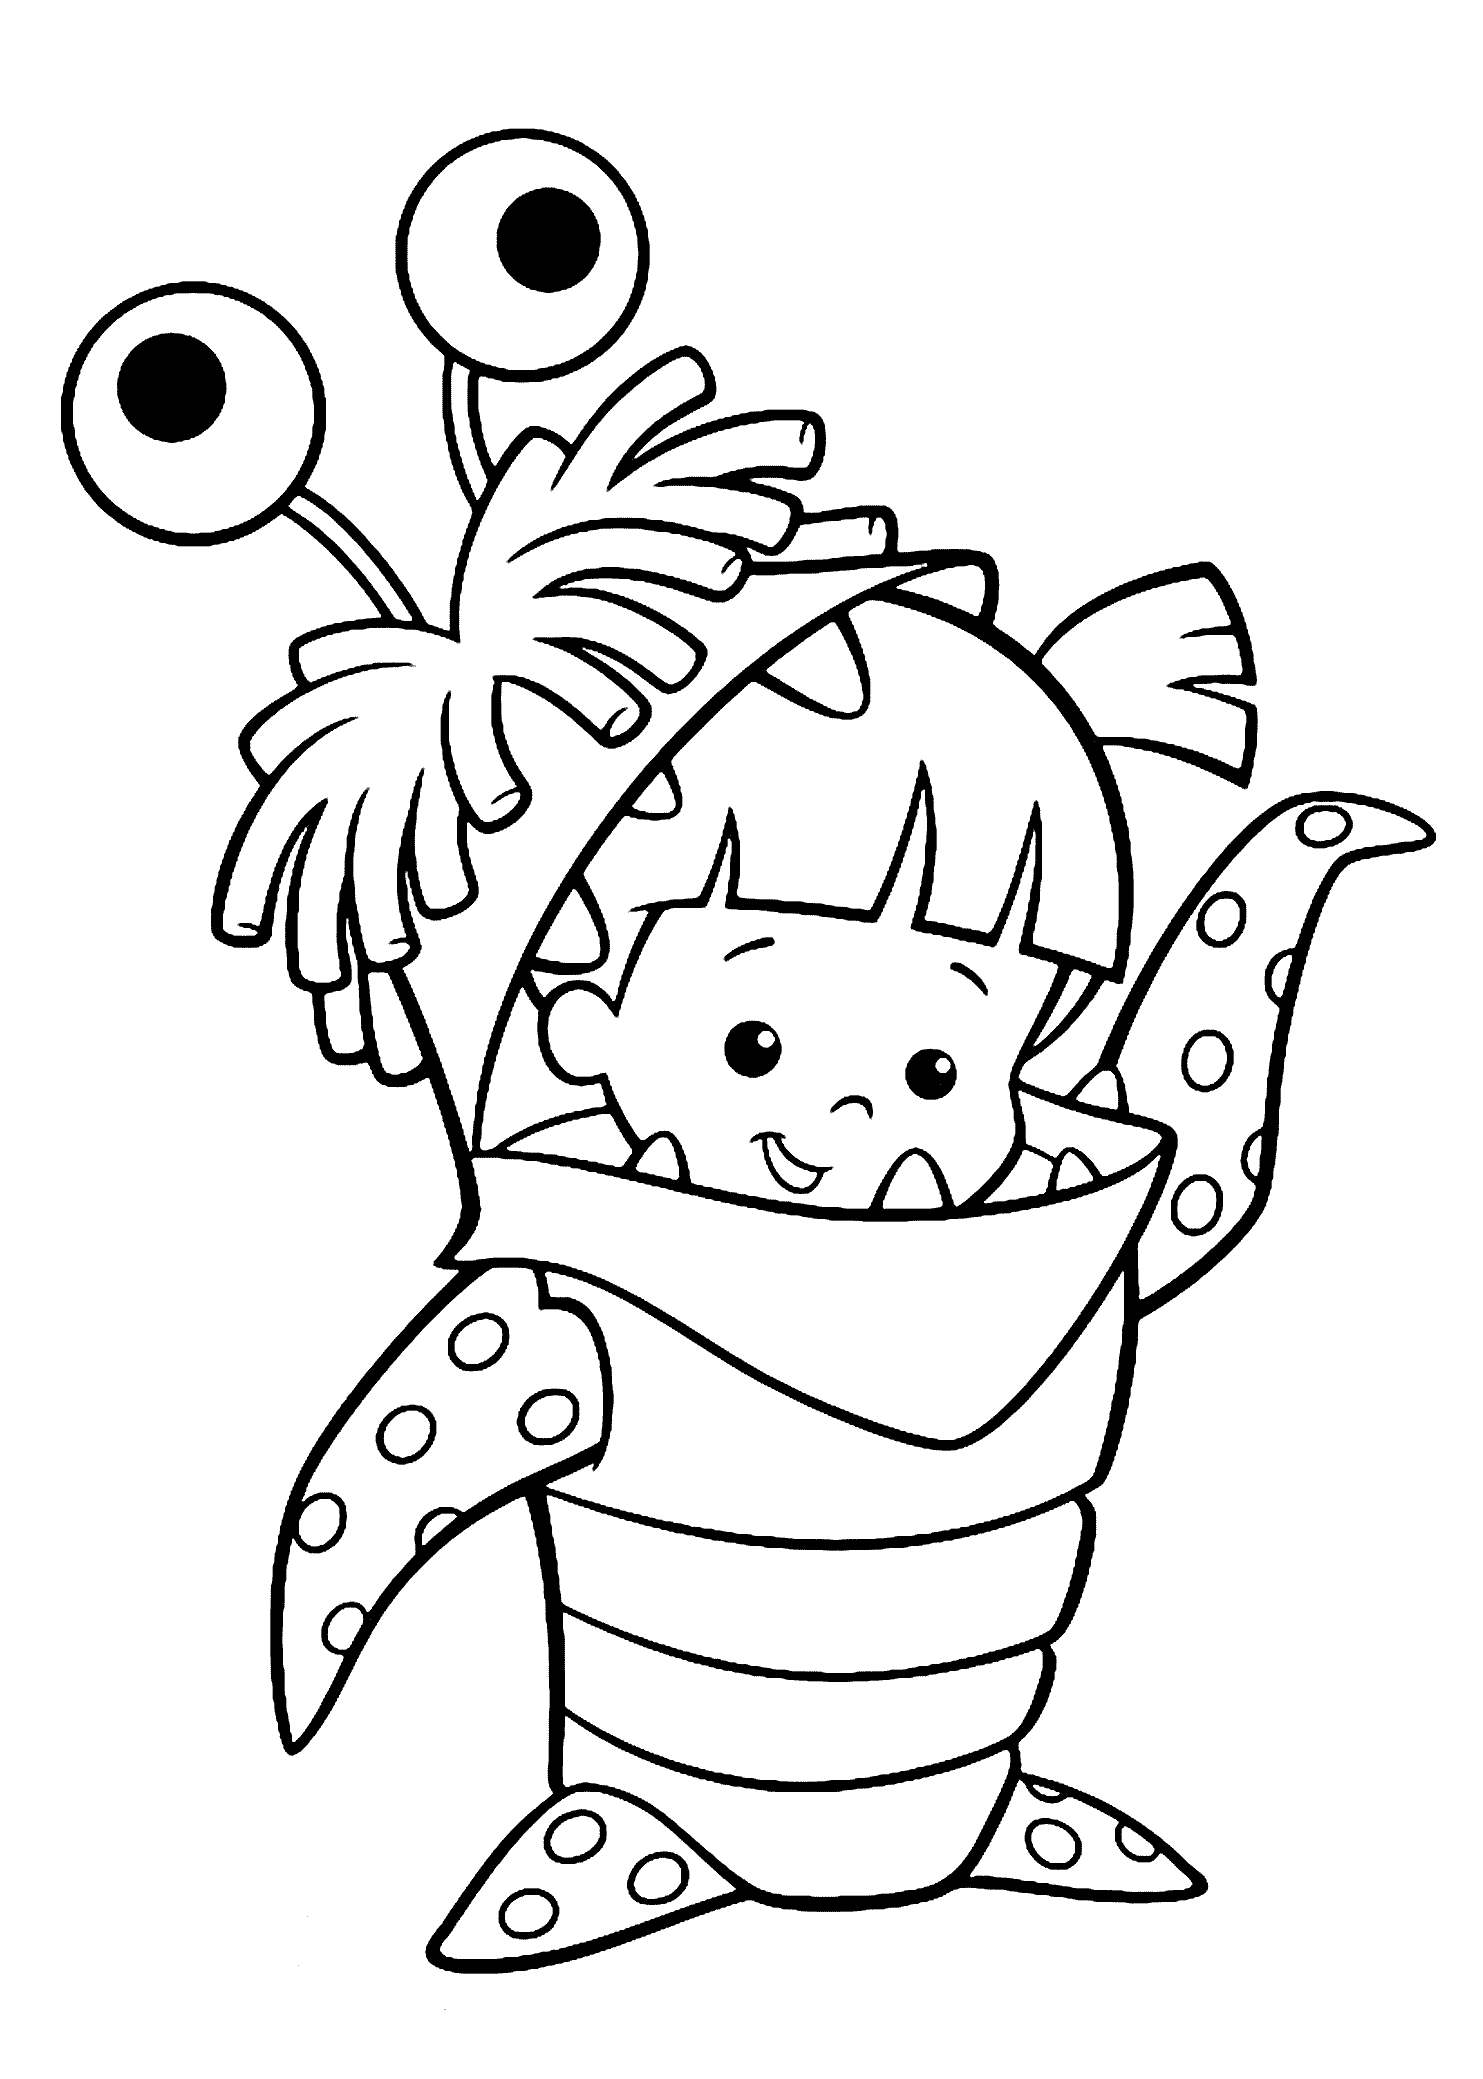 Popular Coloring pages Archives - Page 9 of 34 - Coloring Pages